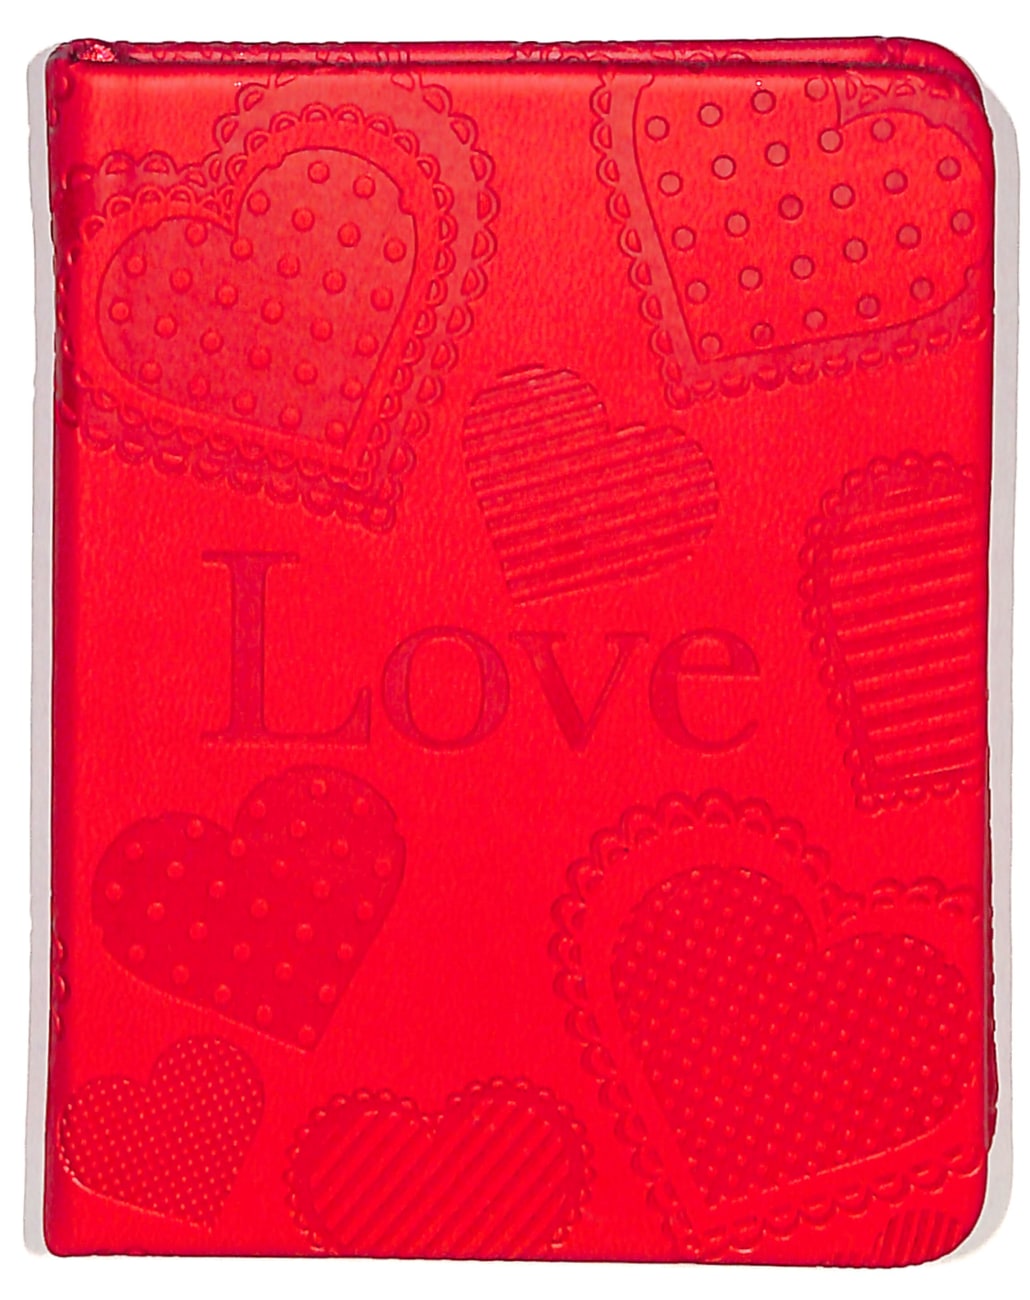 Love (Red) (Pocket Inspirations Series) Imitation Leather